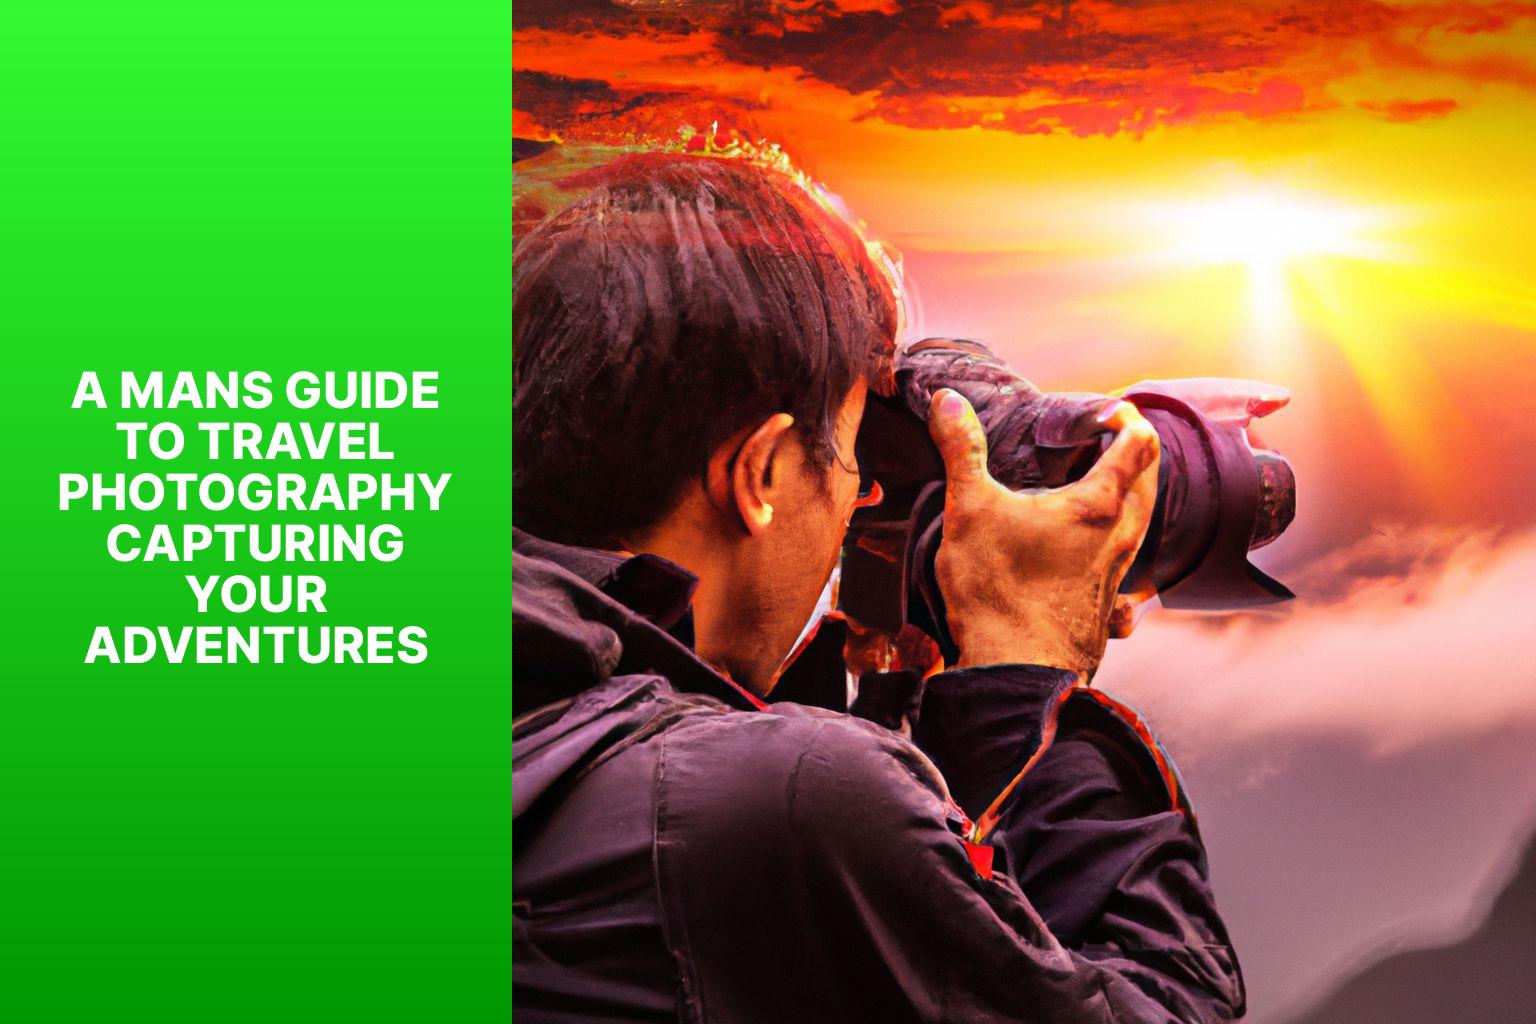 A Man’s Guide to Travel Photography: Capturing Your Adventures